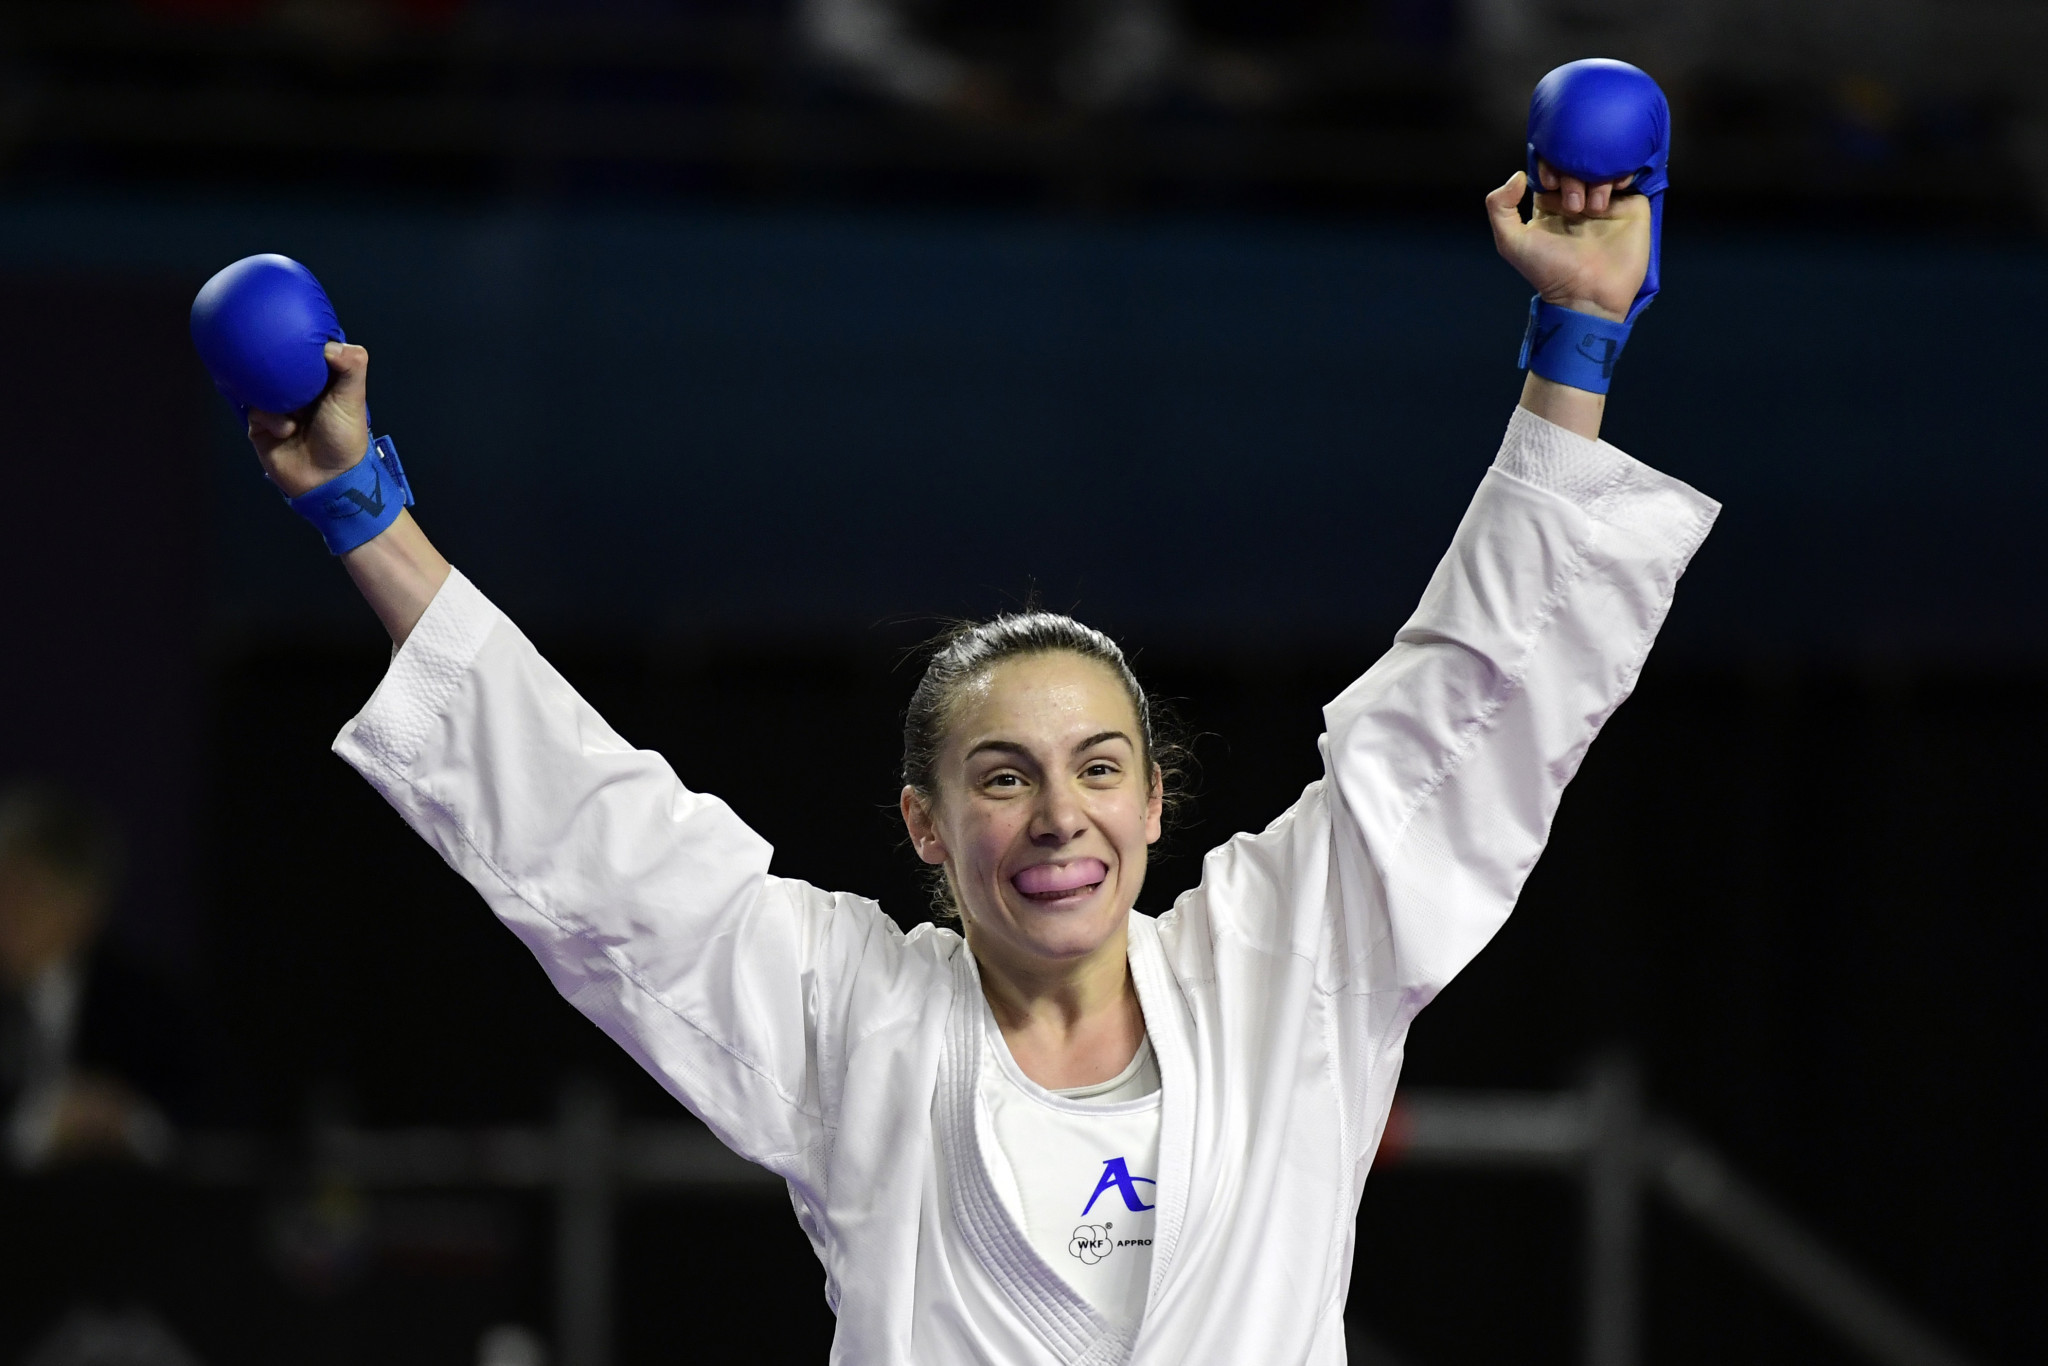 Croatia's Jovana Prekovic was among the karatekas to reach the final in the Female Kumite under-61 kilograms category at the Karate 1-Premier League in Lisbon ©Getty Images